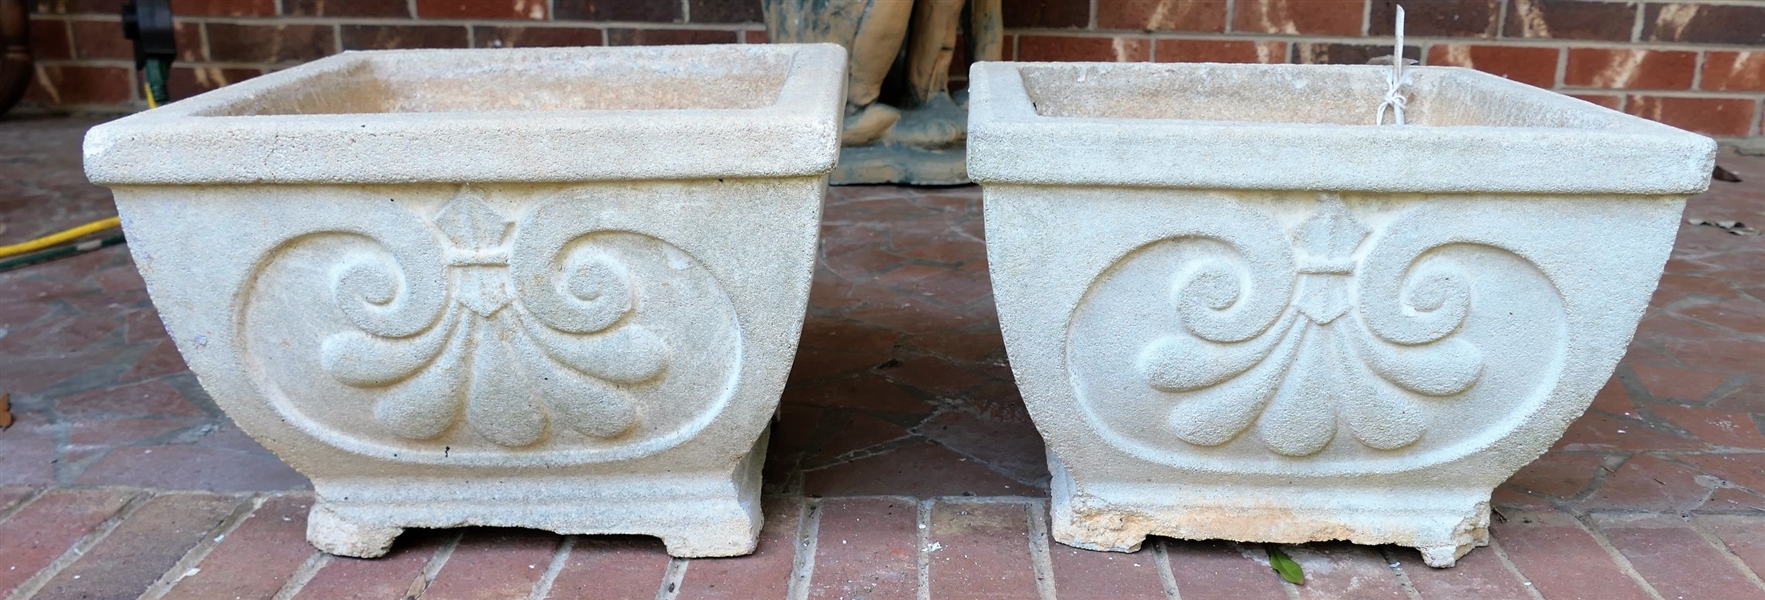 Pair of Square Concrete Planters - Each Measures 10" Tall 14" by 14"